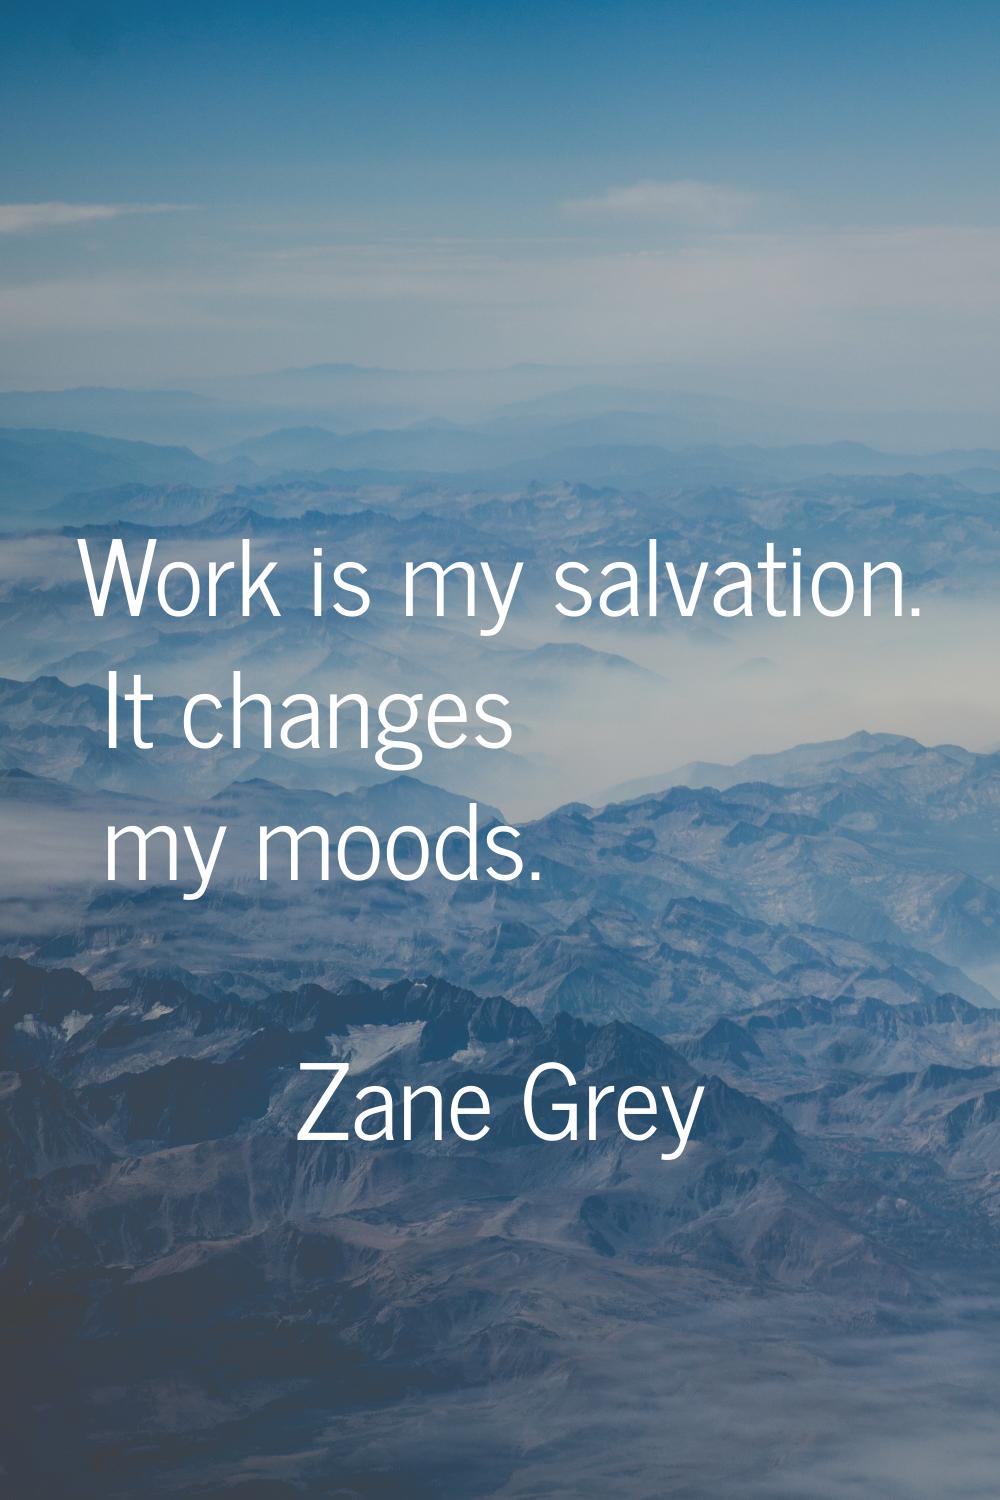 Work is my salvation. It changes my moods.